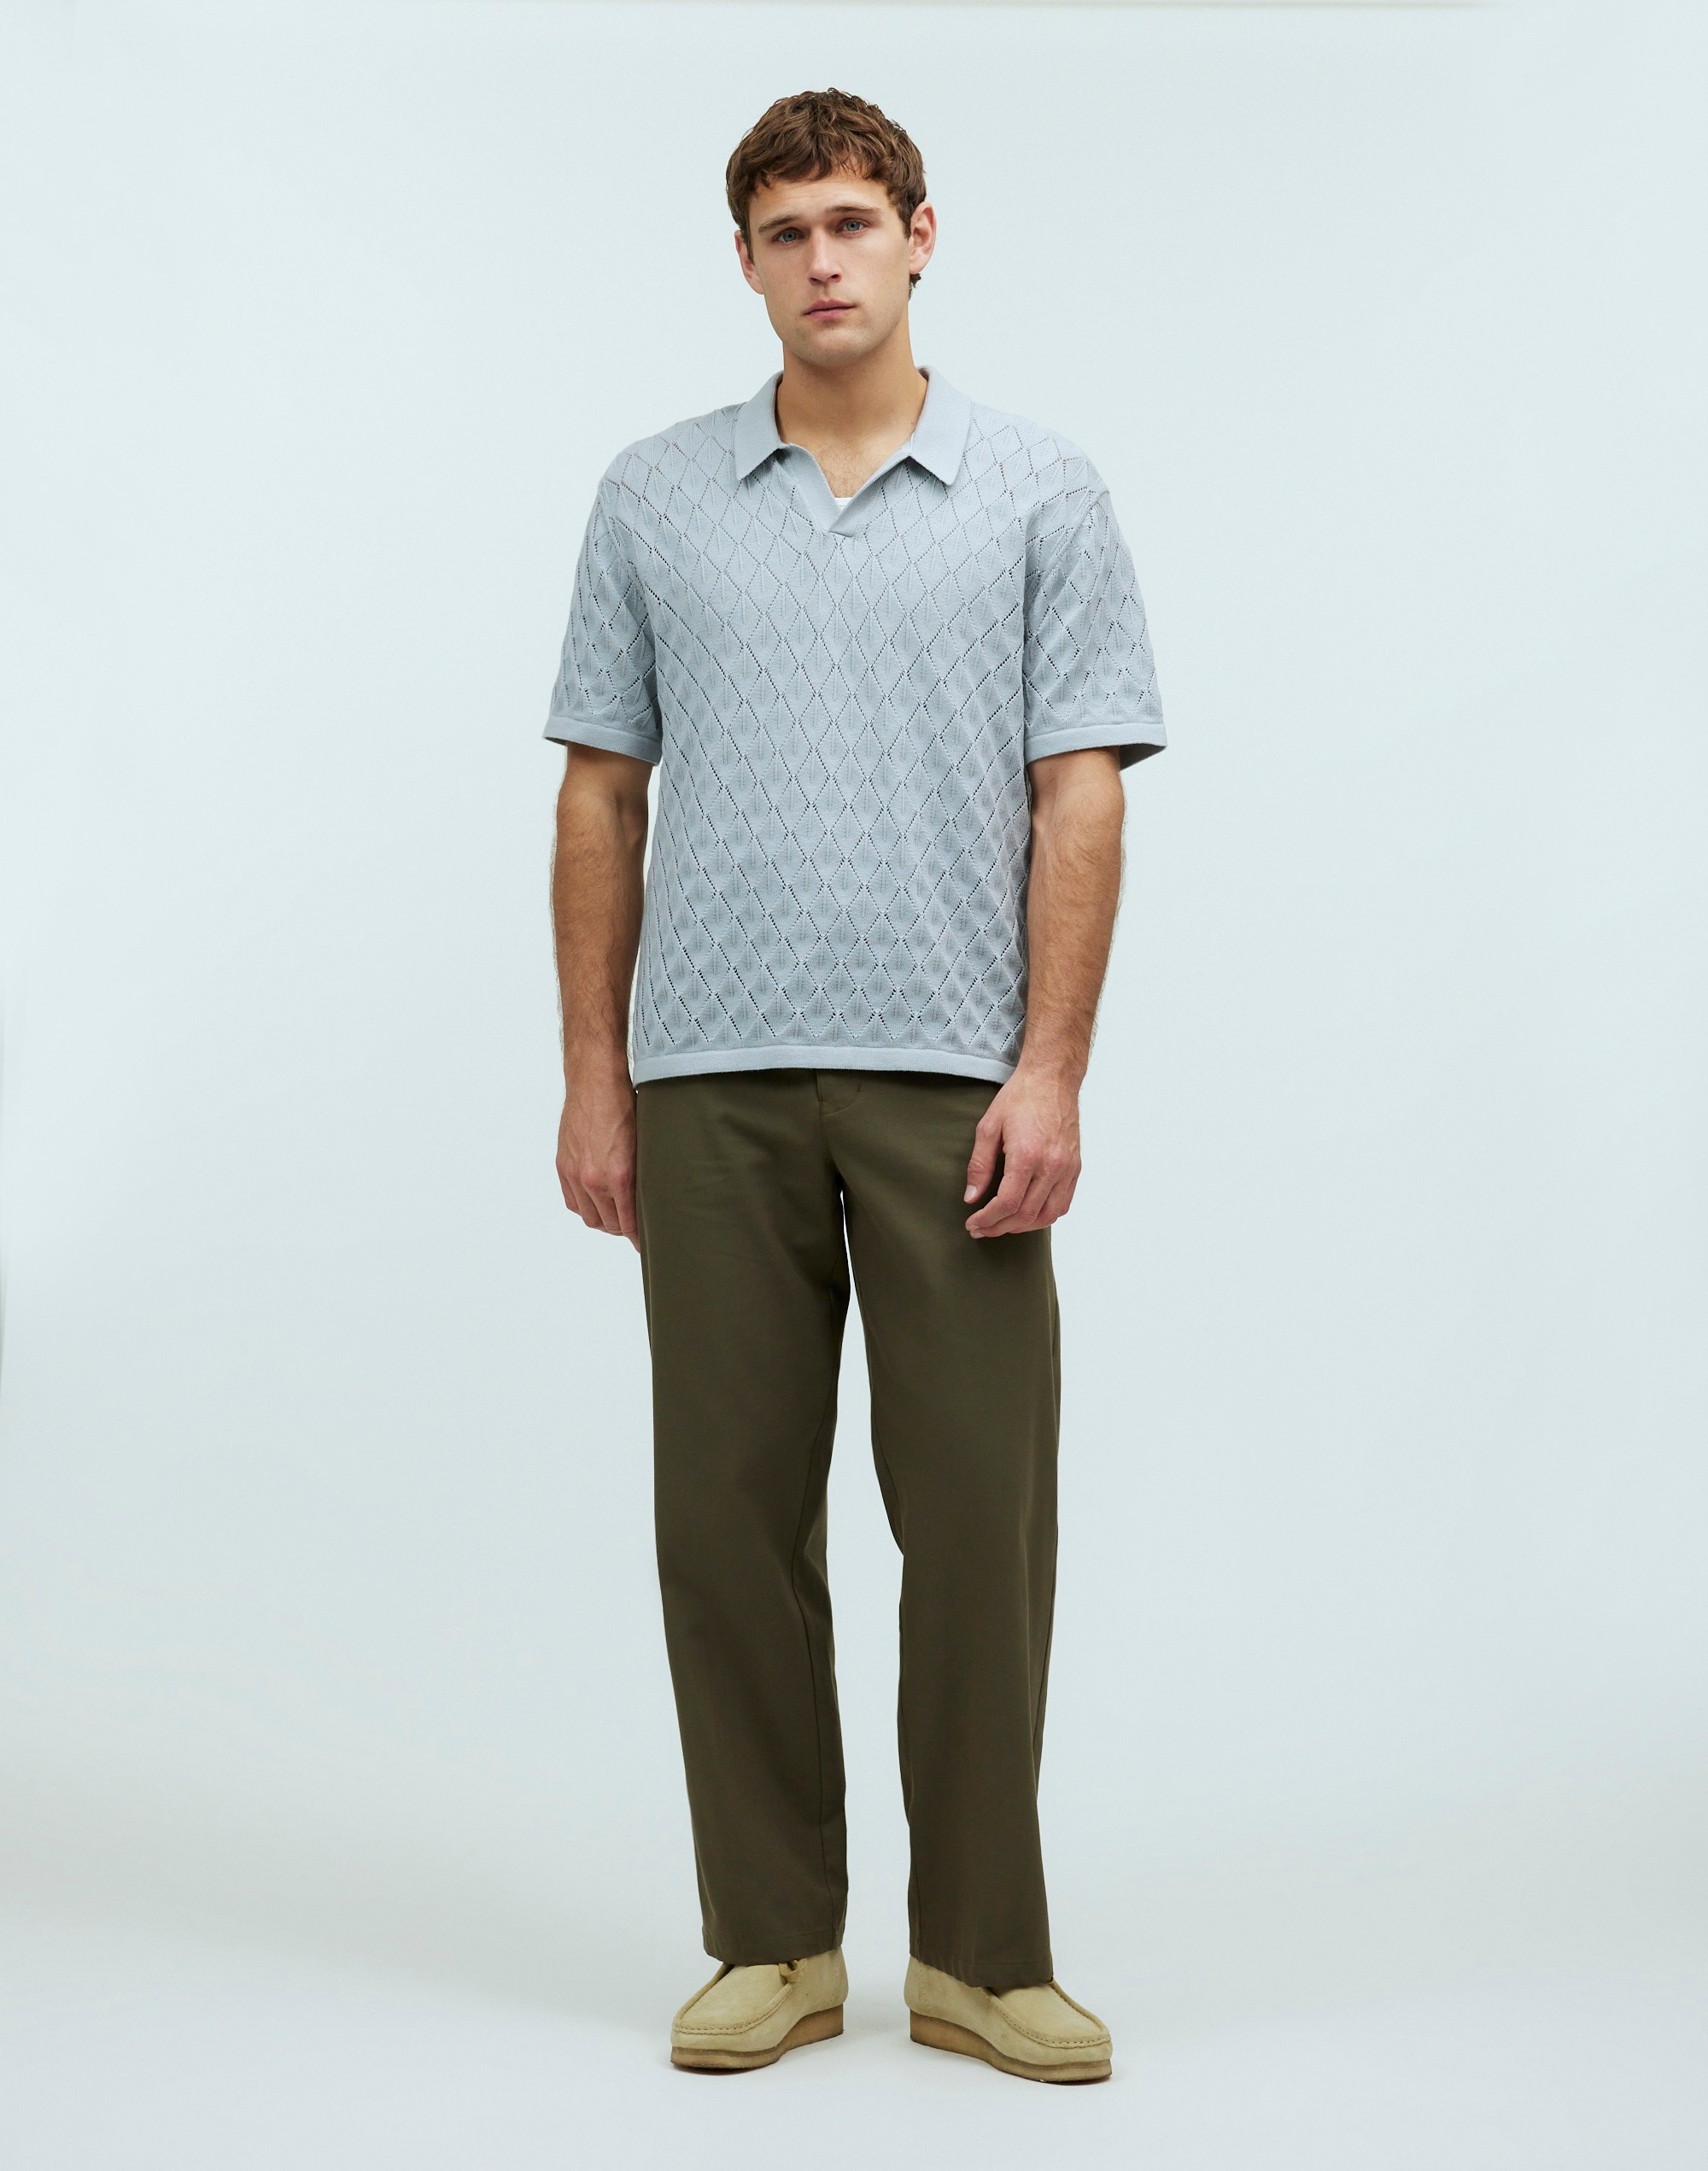 Mw Johnny-collar Sweater Polo Shirt In Glassware Blue